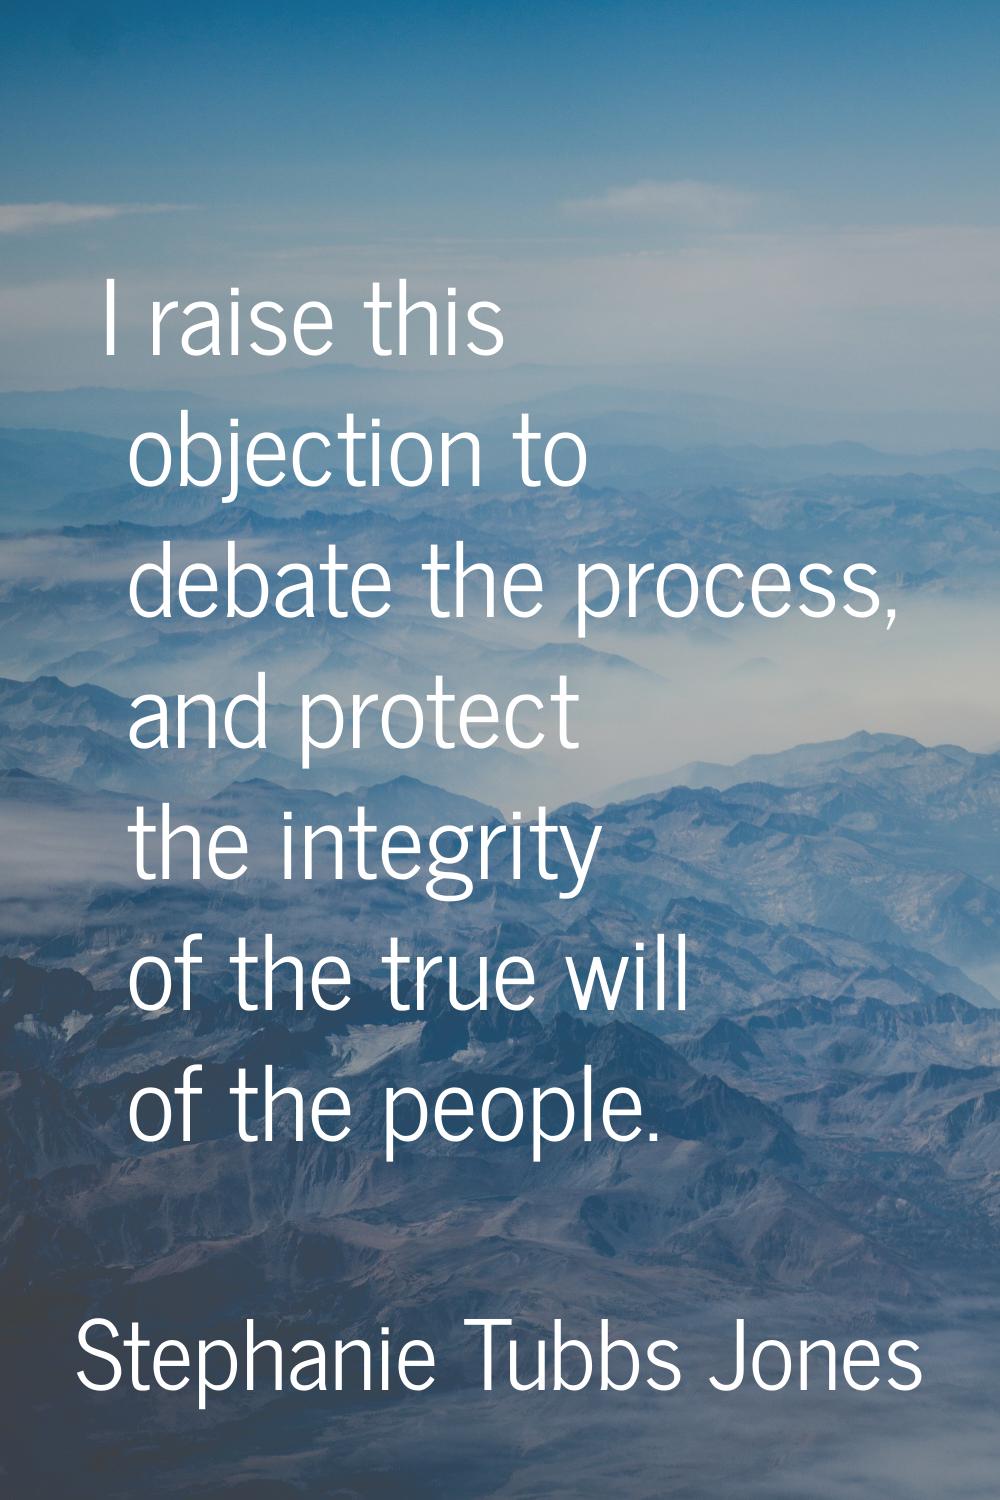 I raise this objection to debate the process, and protect the integrity of the true will of the peo